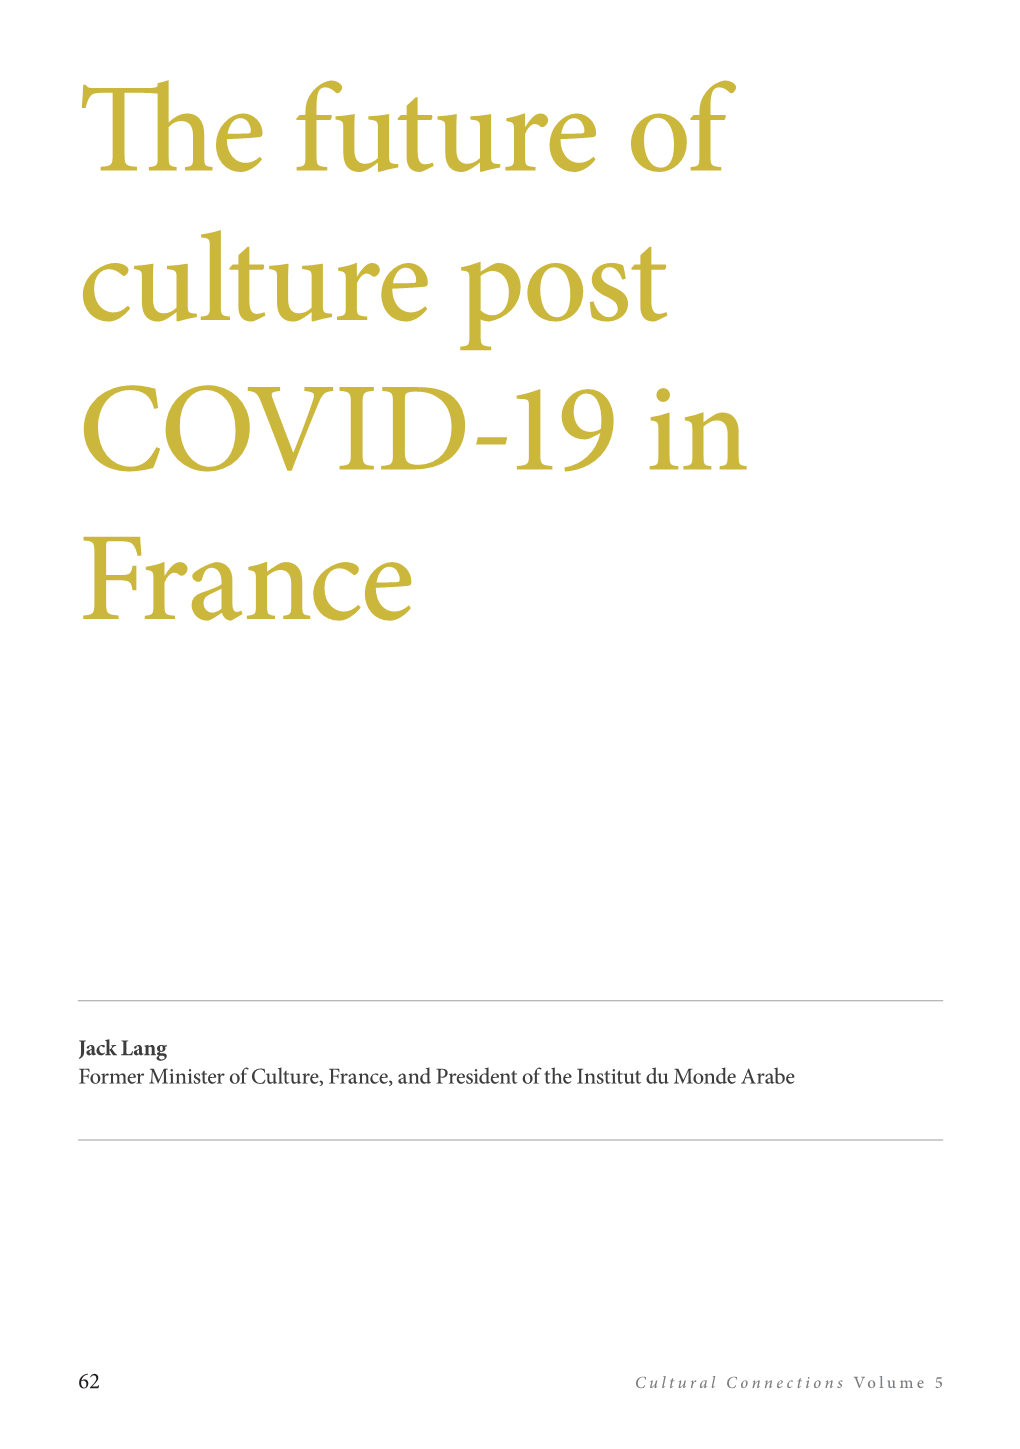 The Future of Culture Post COVID-19 in France Jack Lang 9 Mins